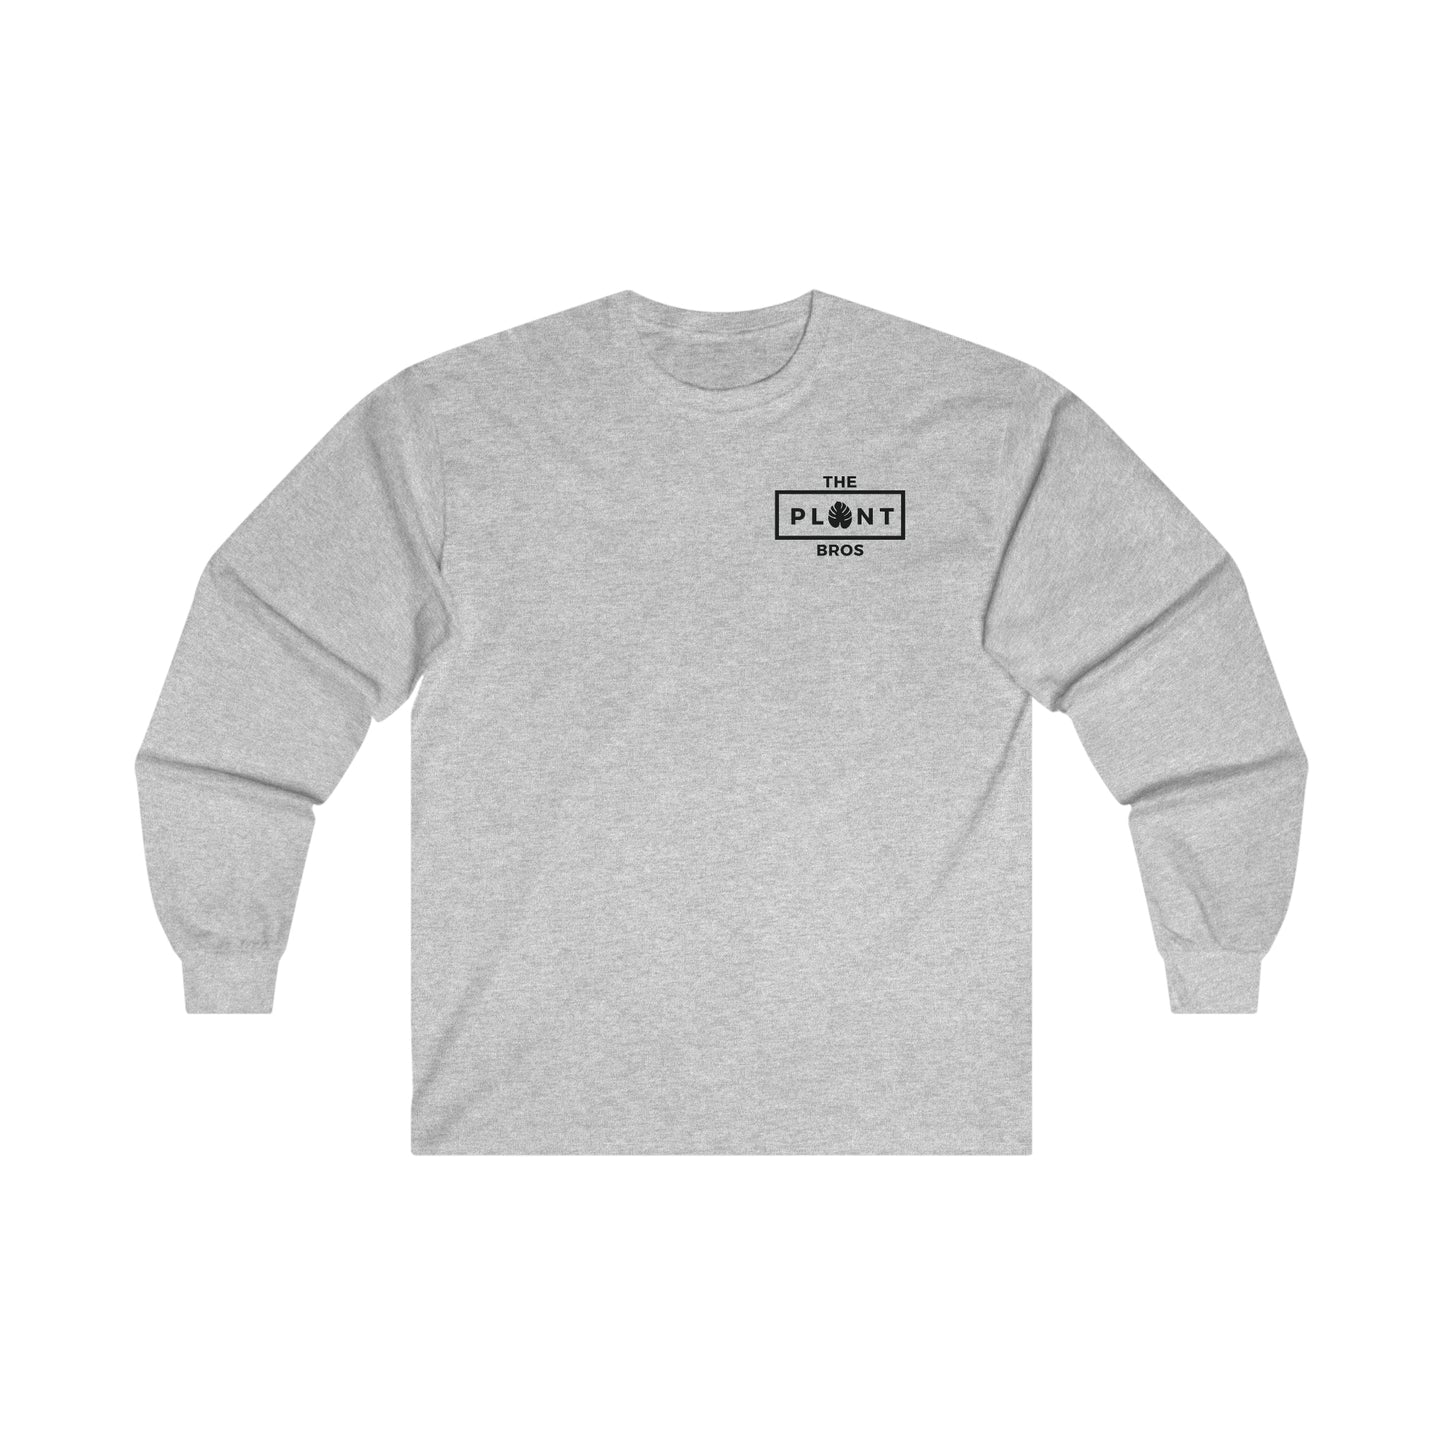 Black "Real Growers Only!" Long Sleeve Tee